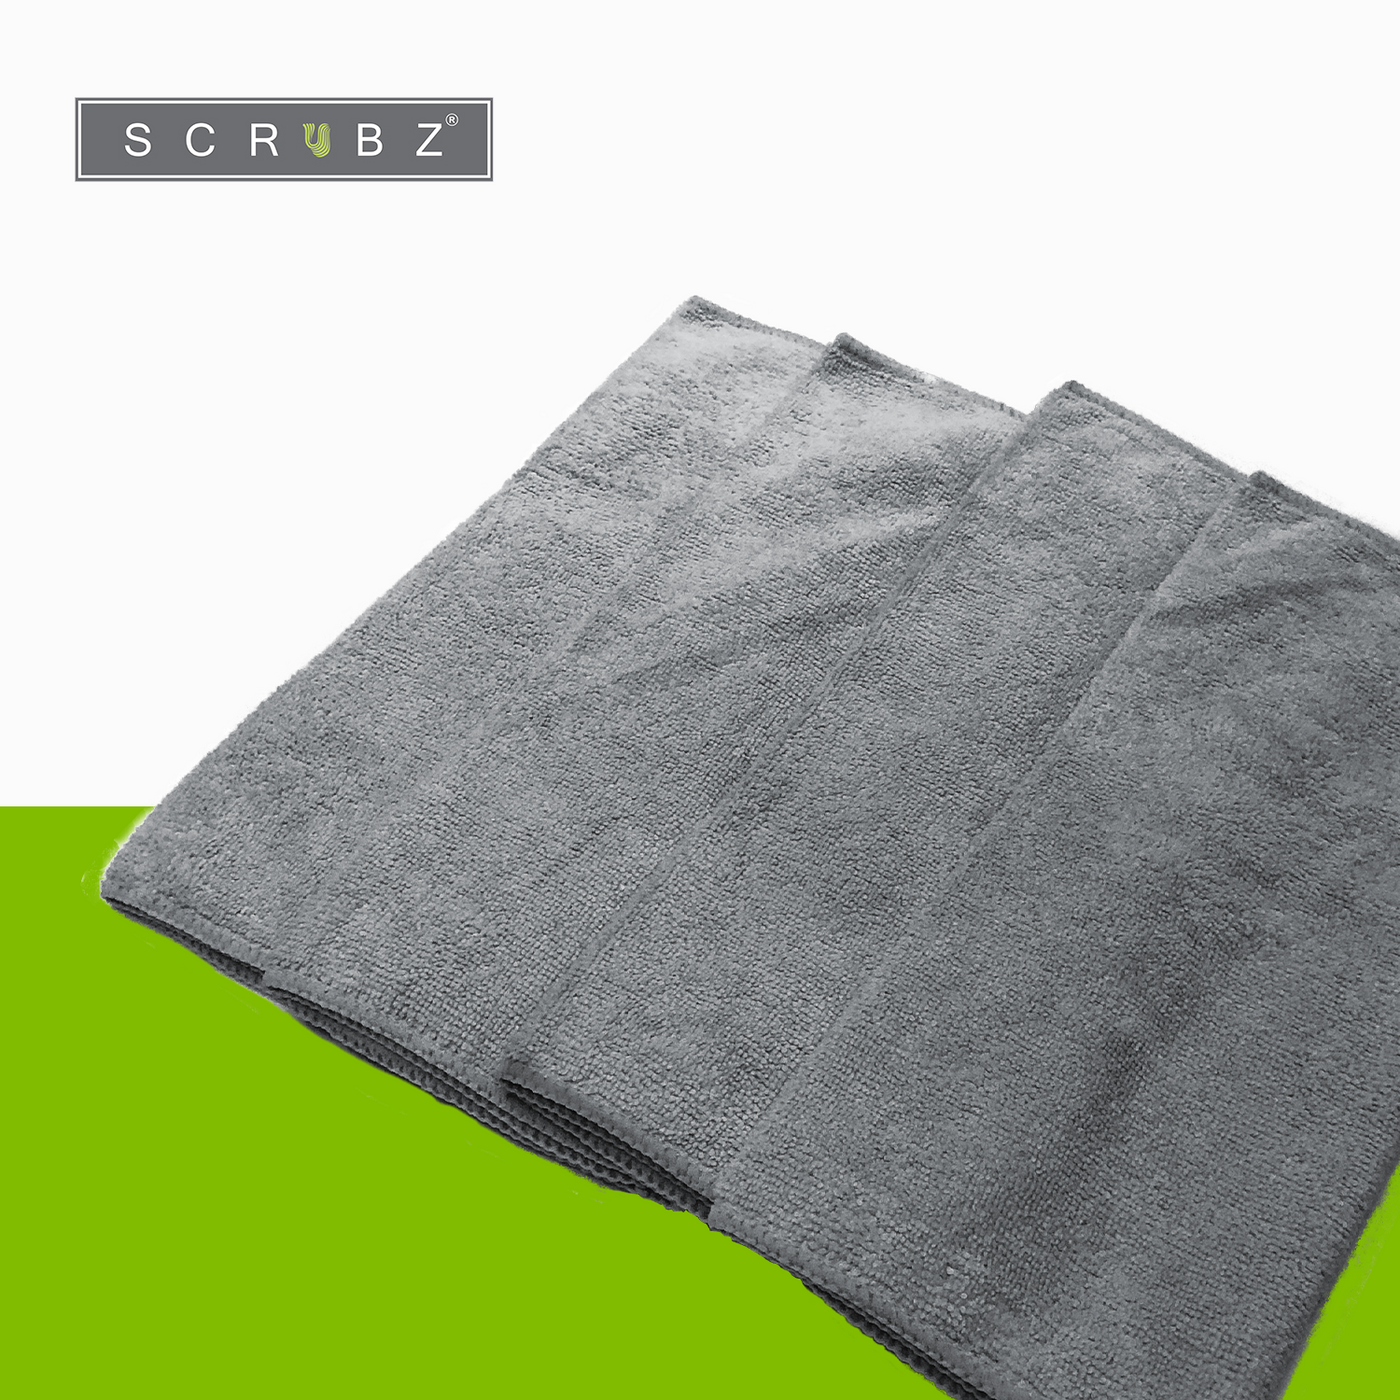 SCRUBZ Premium Cleaning Cloth set of 10, 80% Polyester | 20% Polyamide 40x 30cm Grey Amazing Gift Idea For Any Occassion!